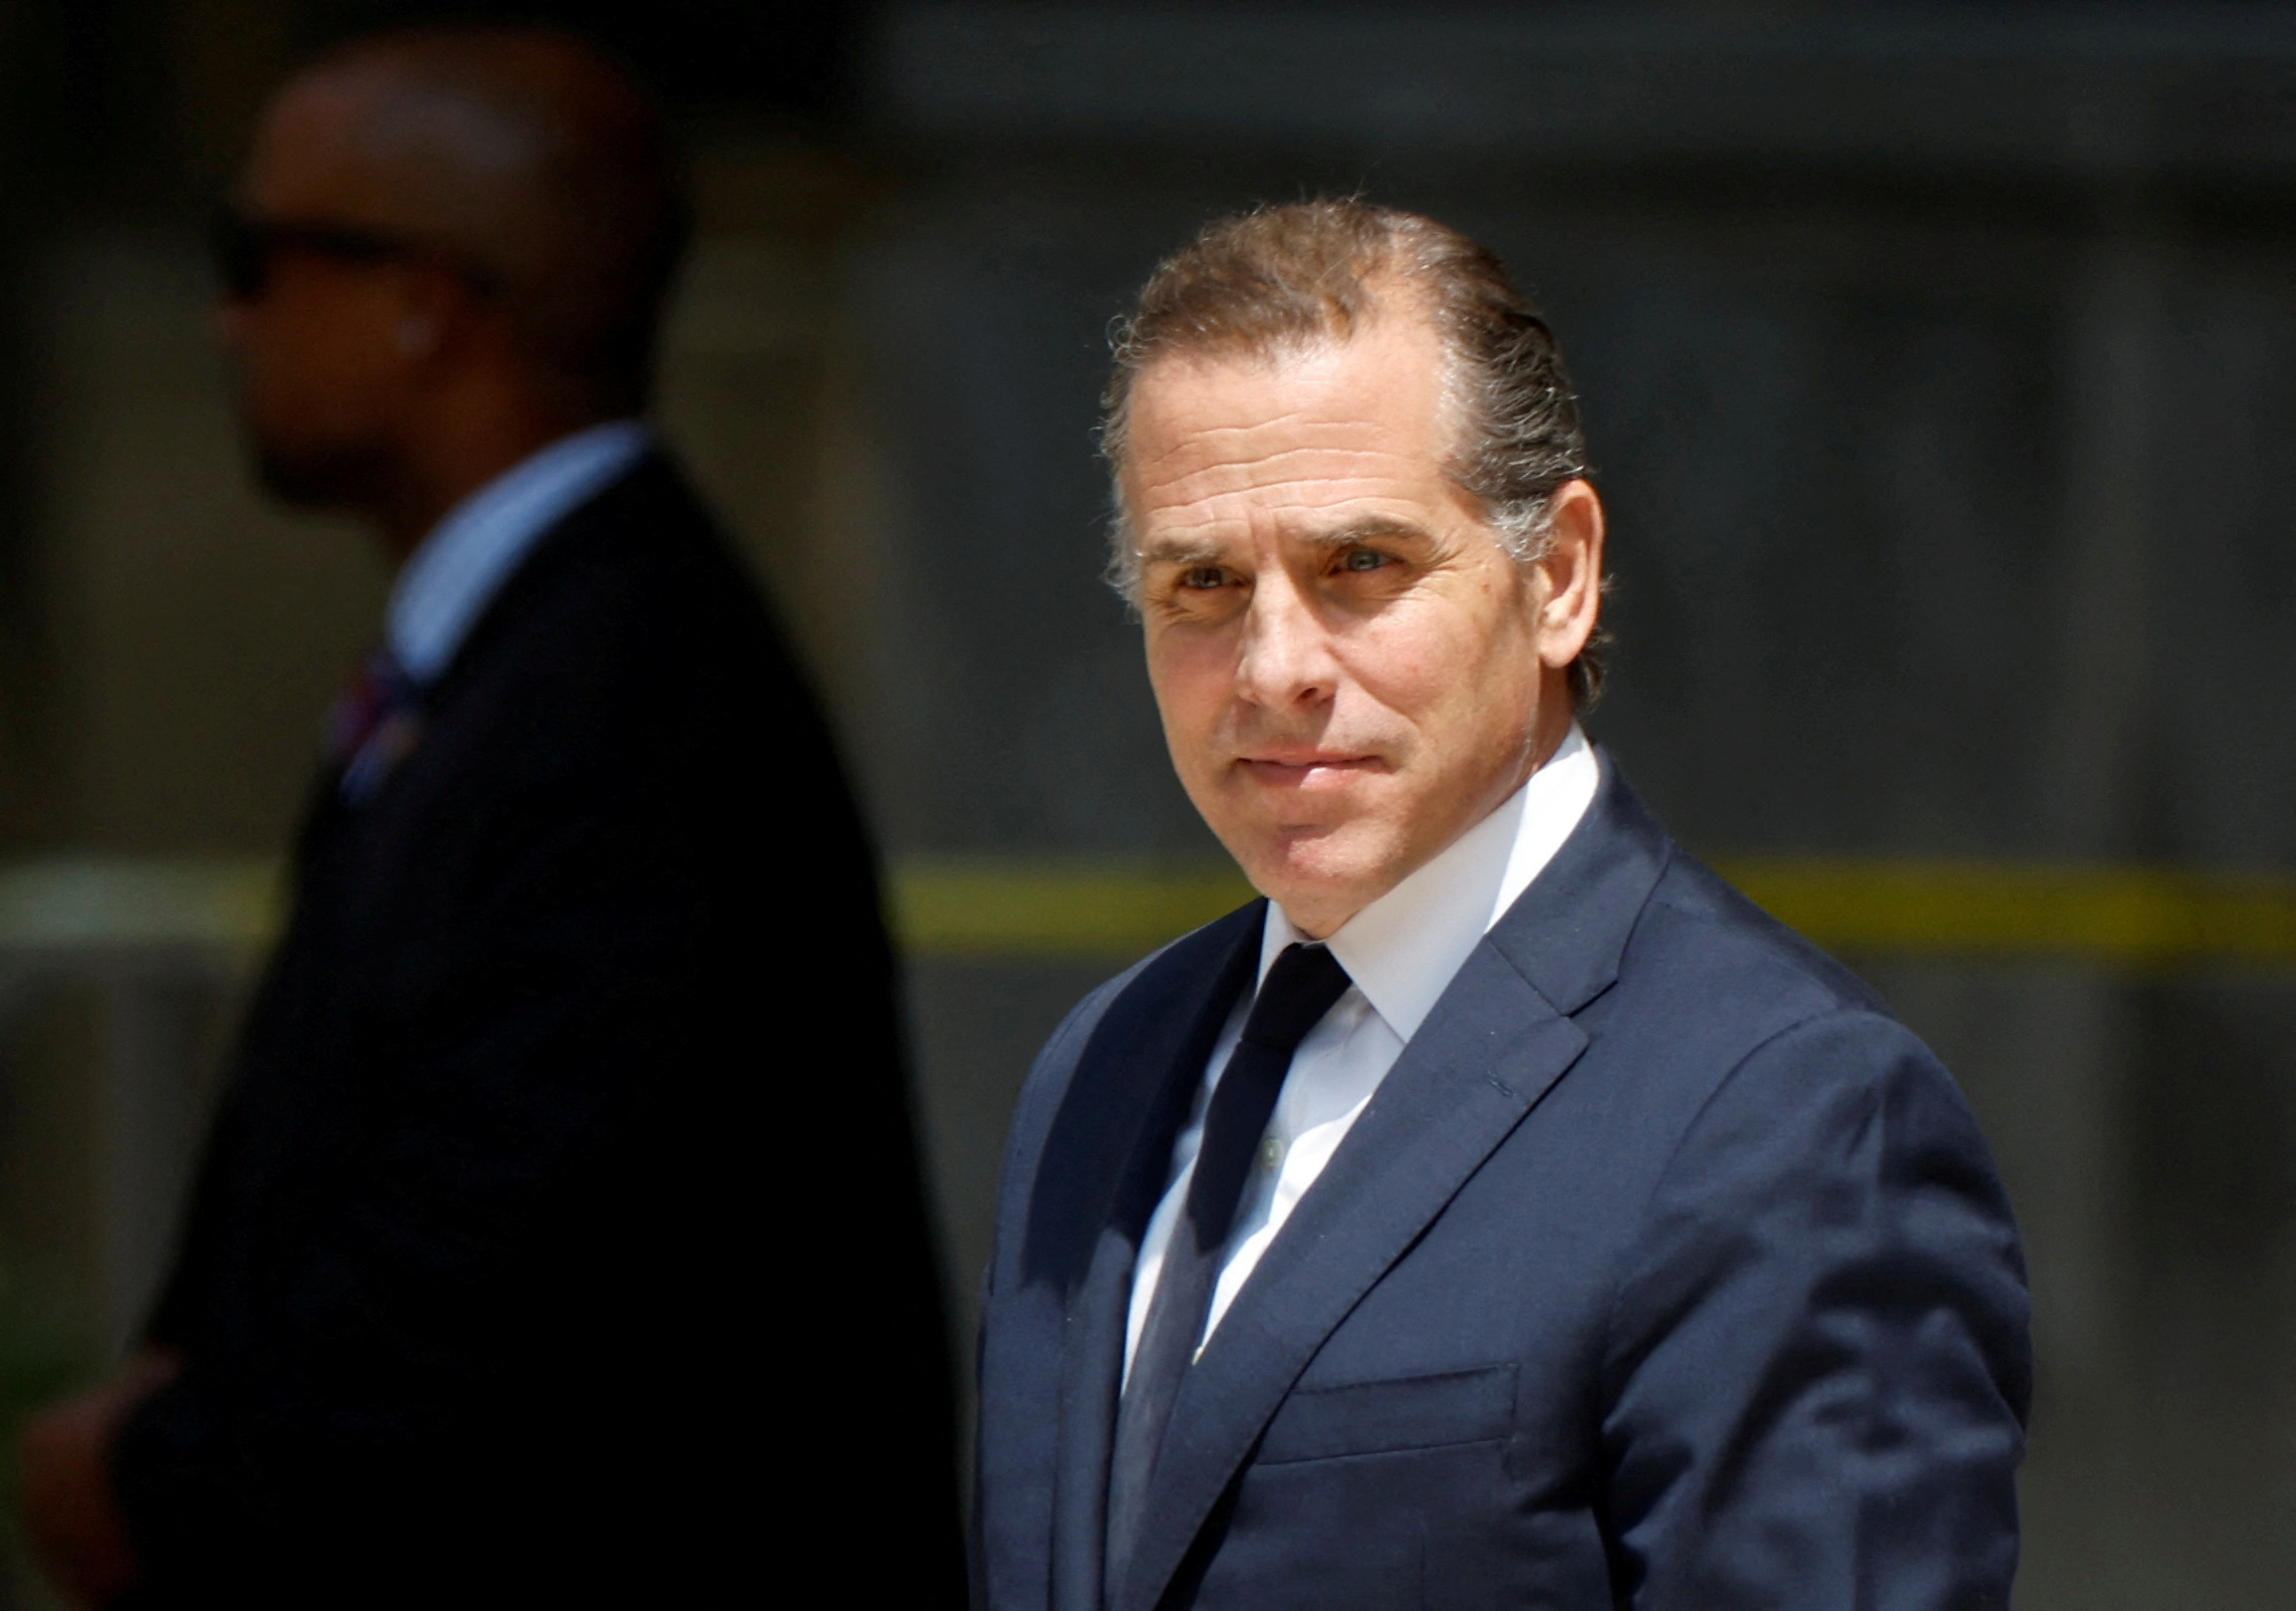 U.S. President Biden's son Hunter to face tax charges in federal court